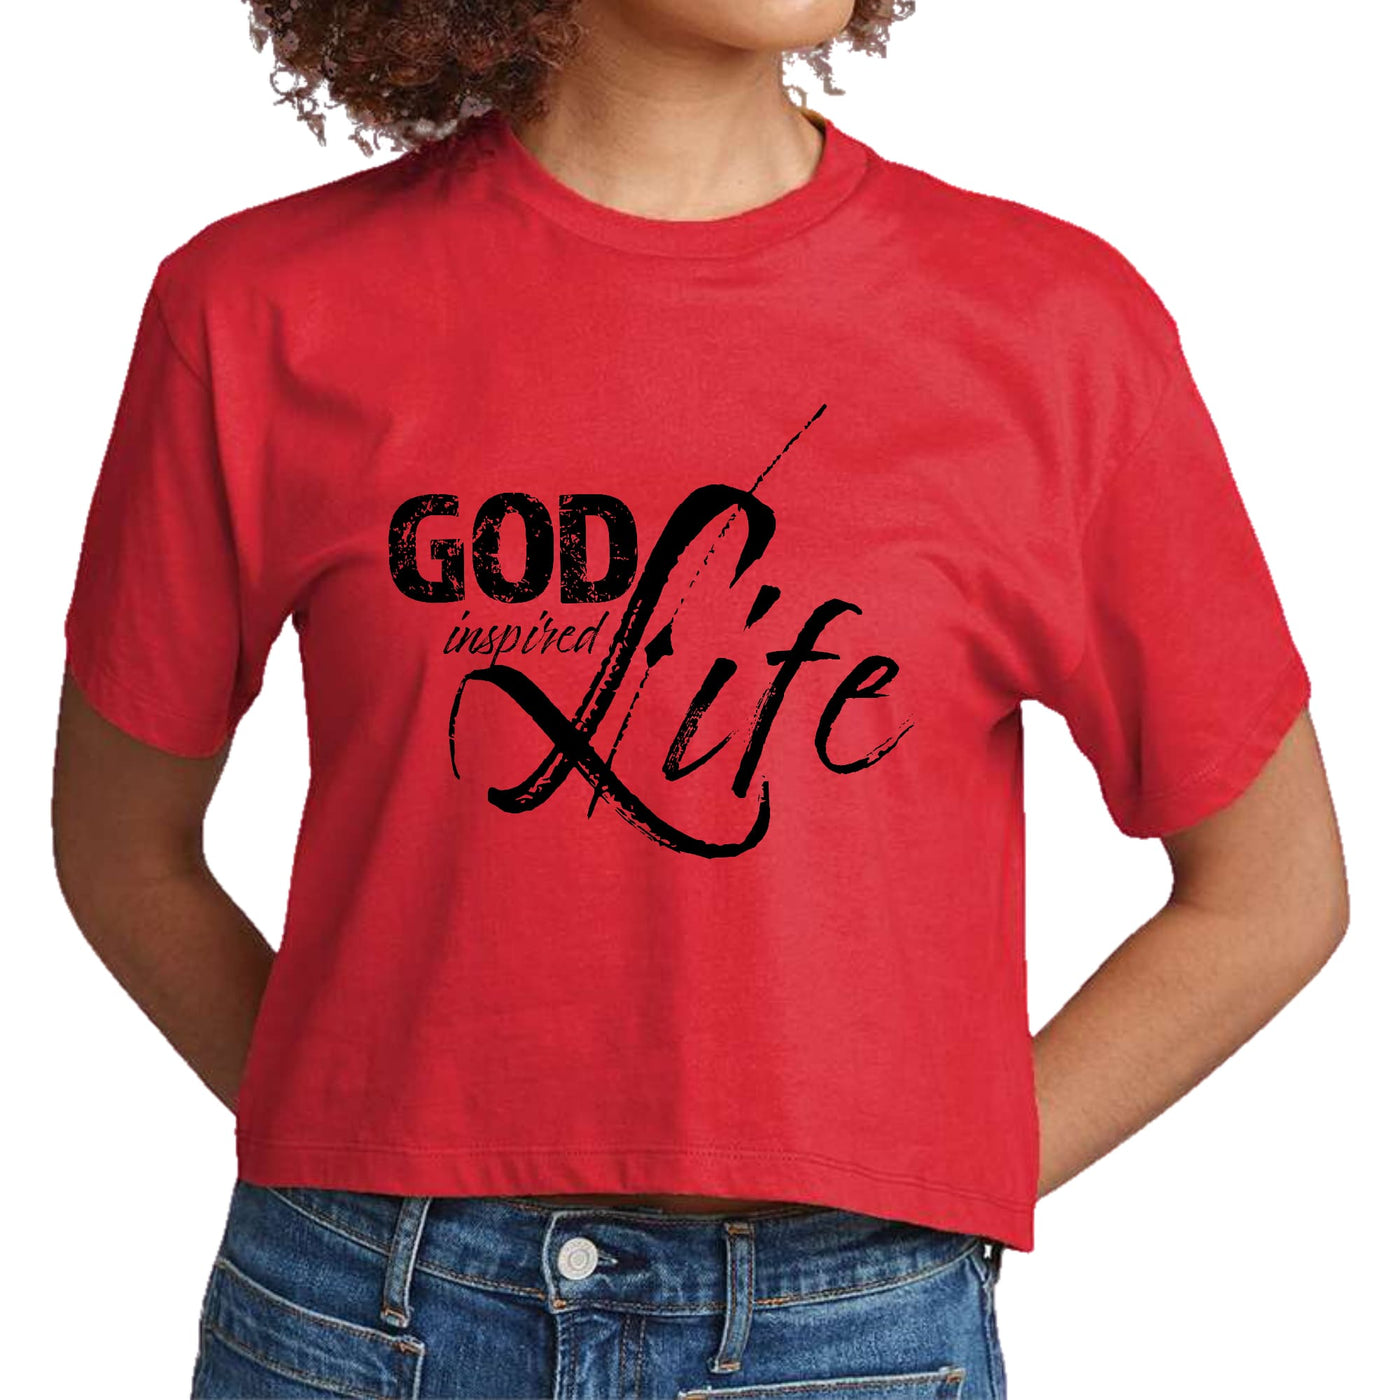 Womens Cropped Graphic T-shirt God Inspired Life Black Illustration - Womens